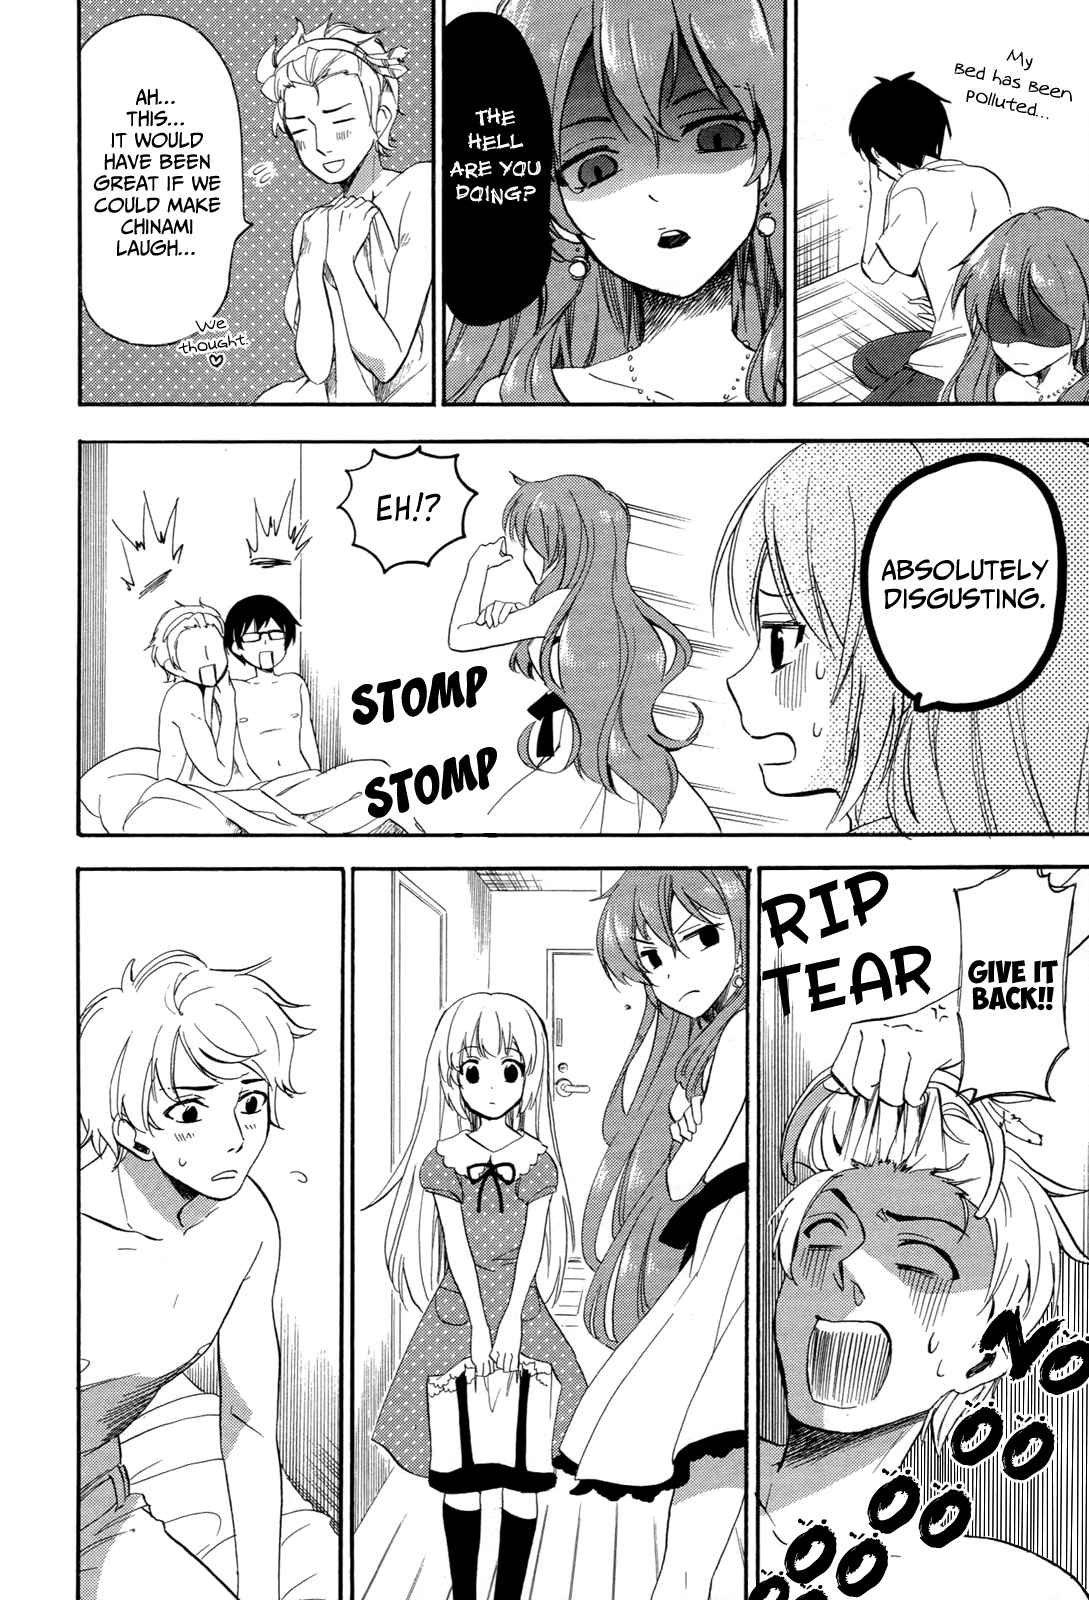 Golden Time Vol. 5 Ch. 26 Time for Two